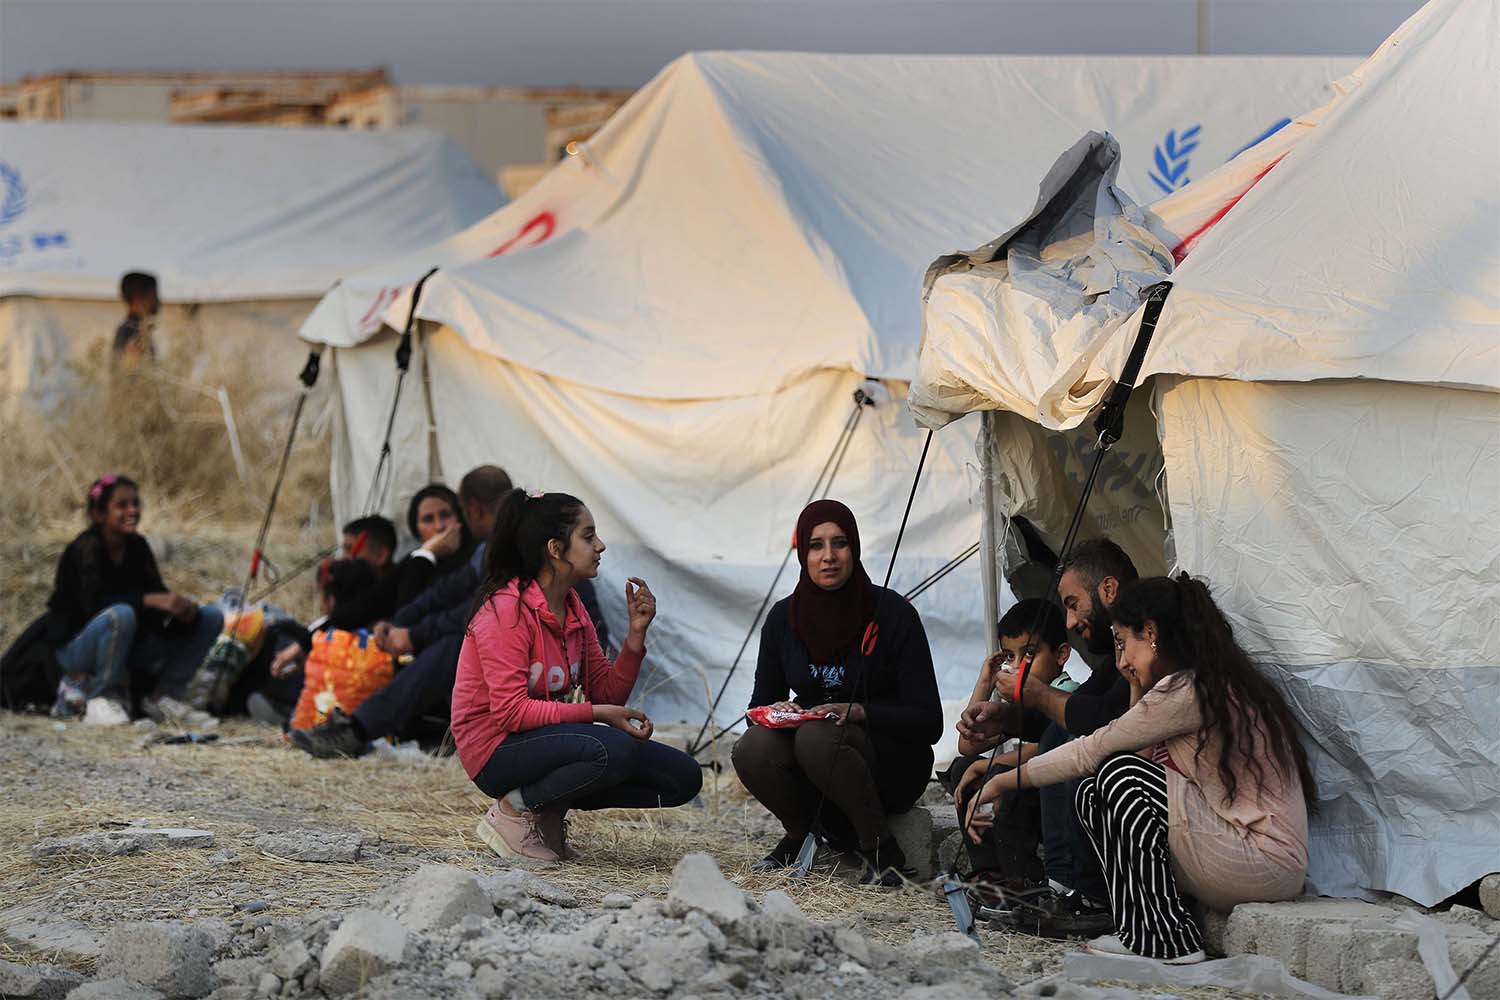 The Syrian conflict has resulted in the largest displacement crisis since World War II